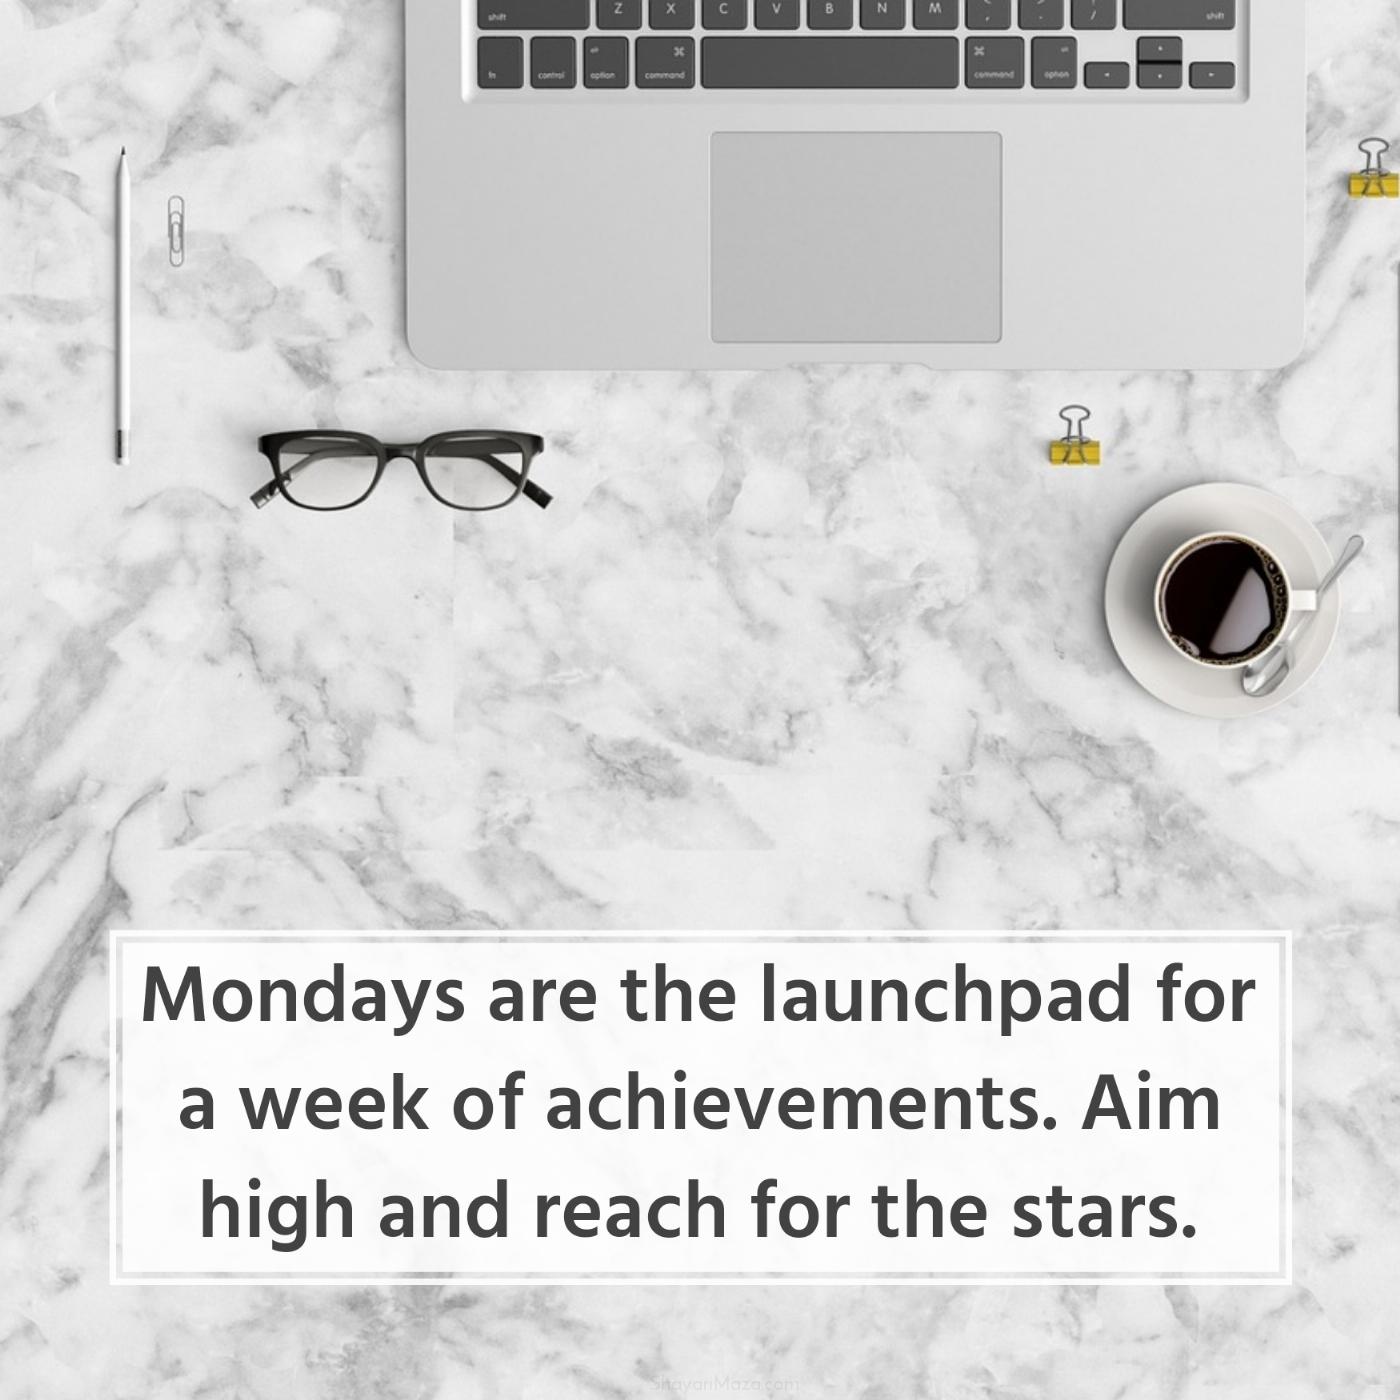 Mondays are the launchpad for a week of achievements